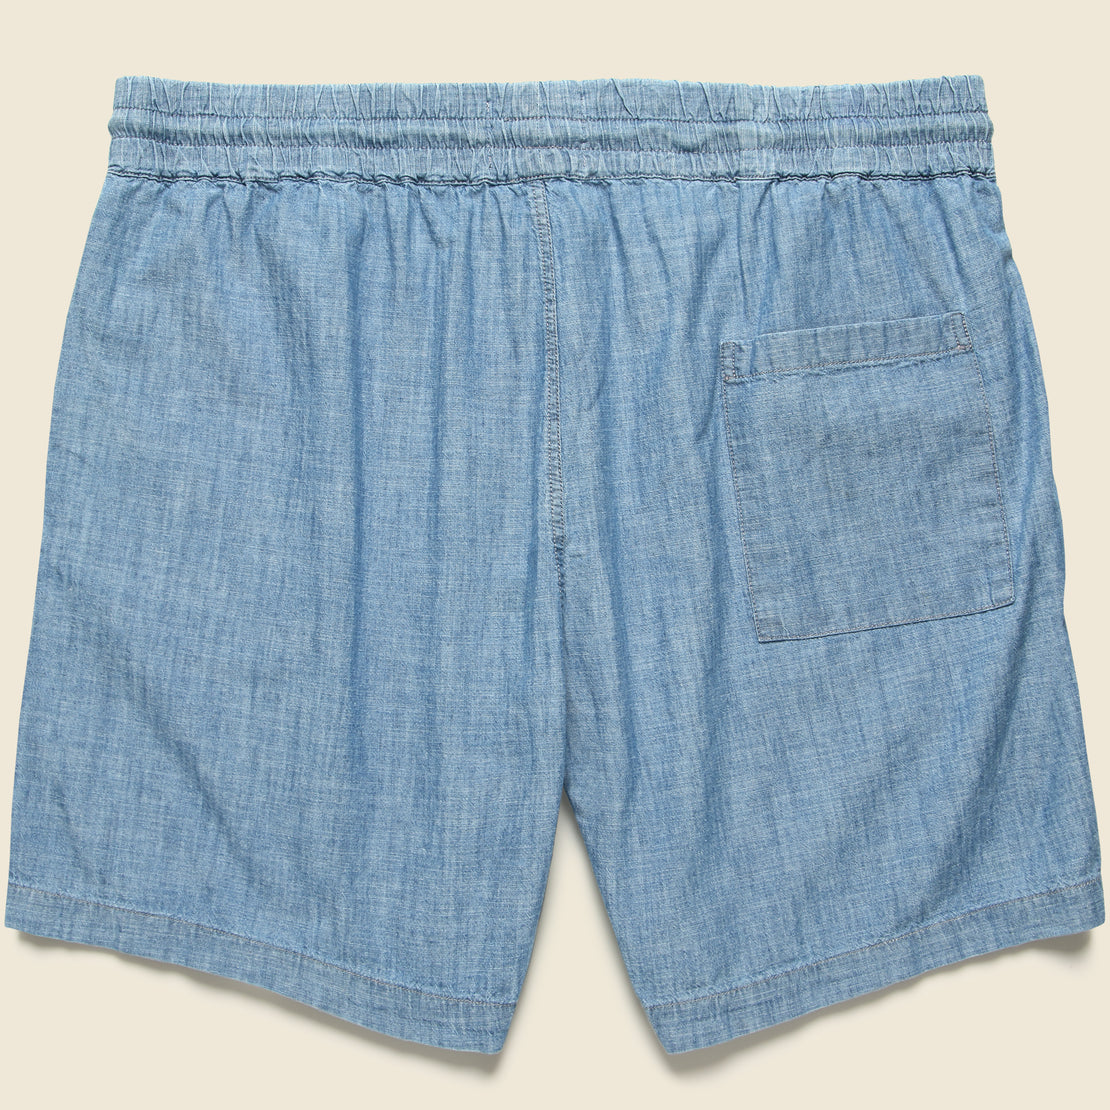 Chambray Shorts - Blue - Portuguese Flannel - STAG Provisions - Shorts - Lounge